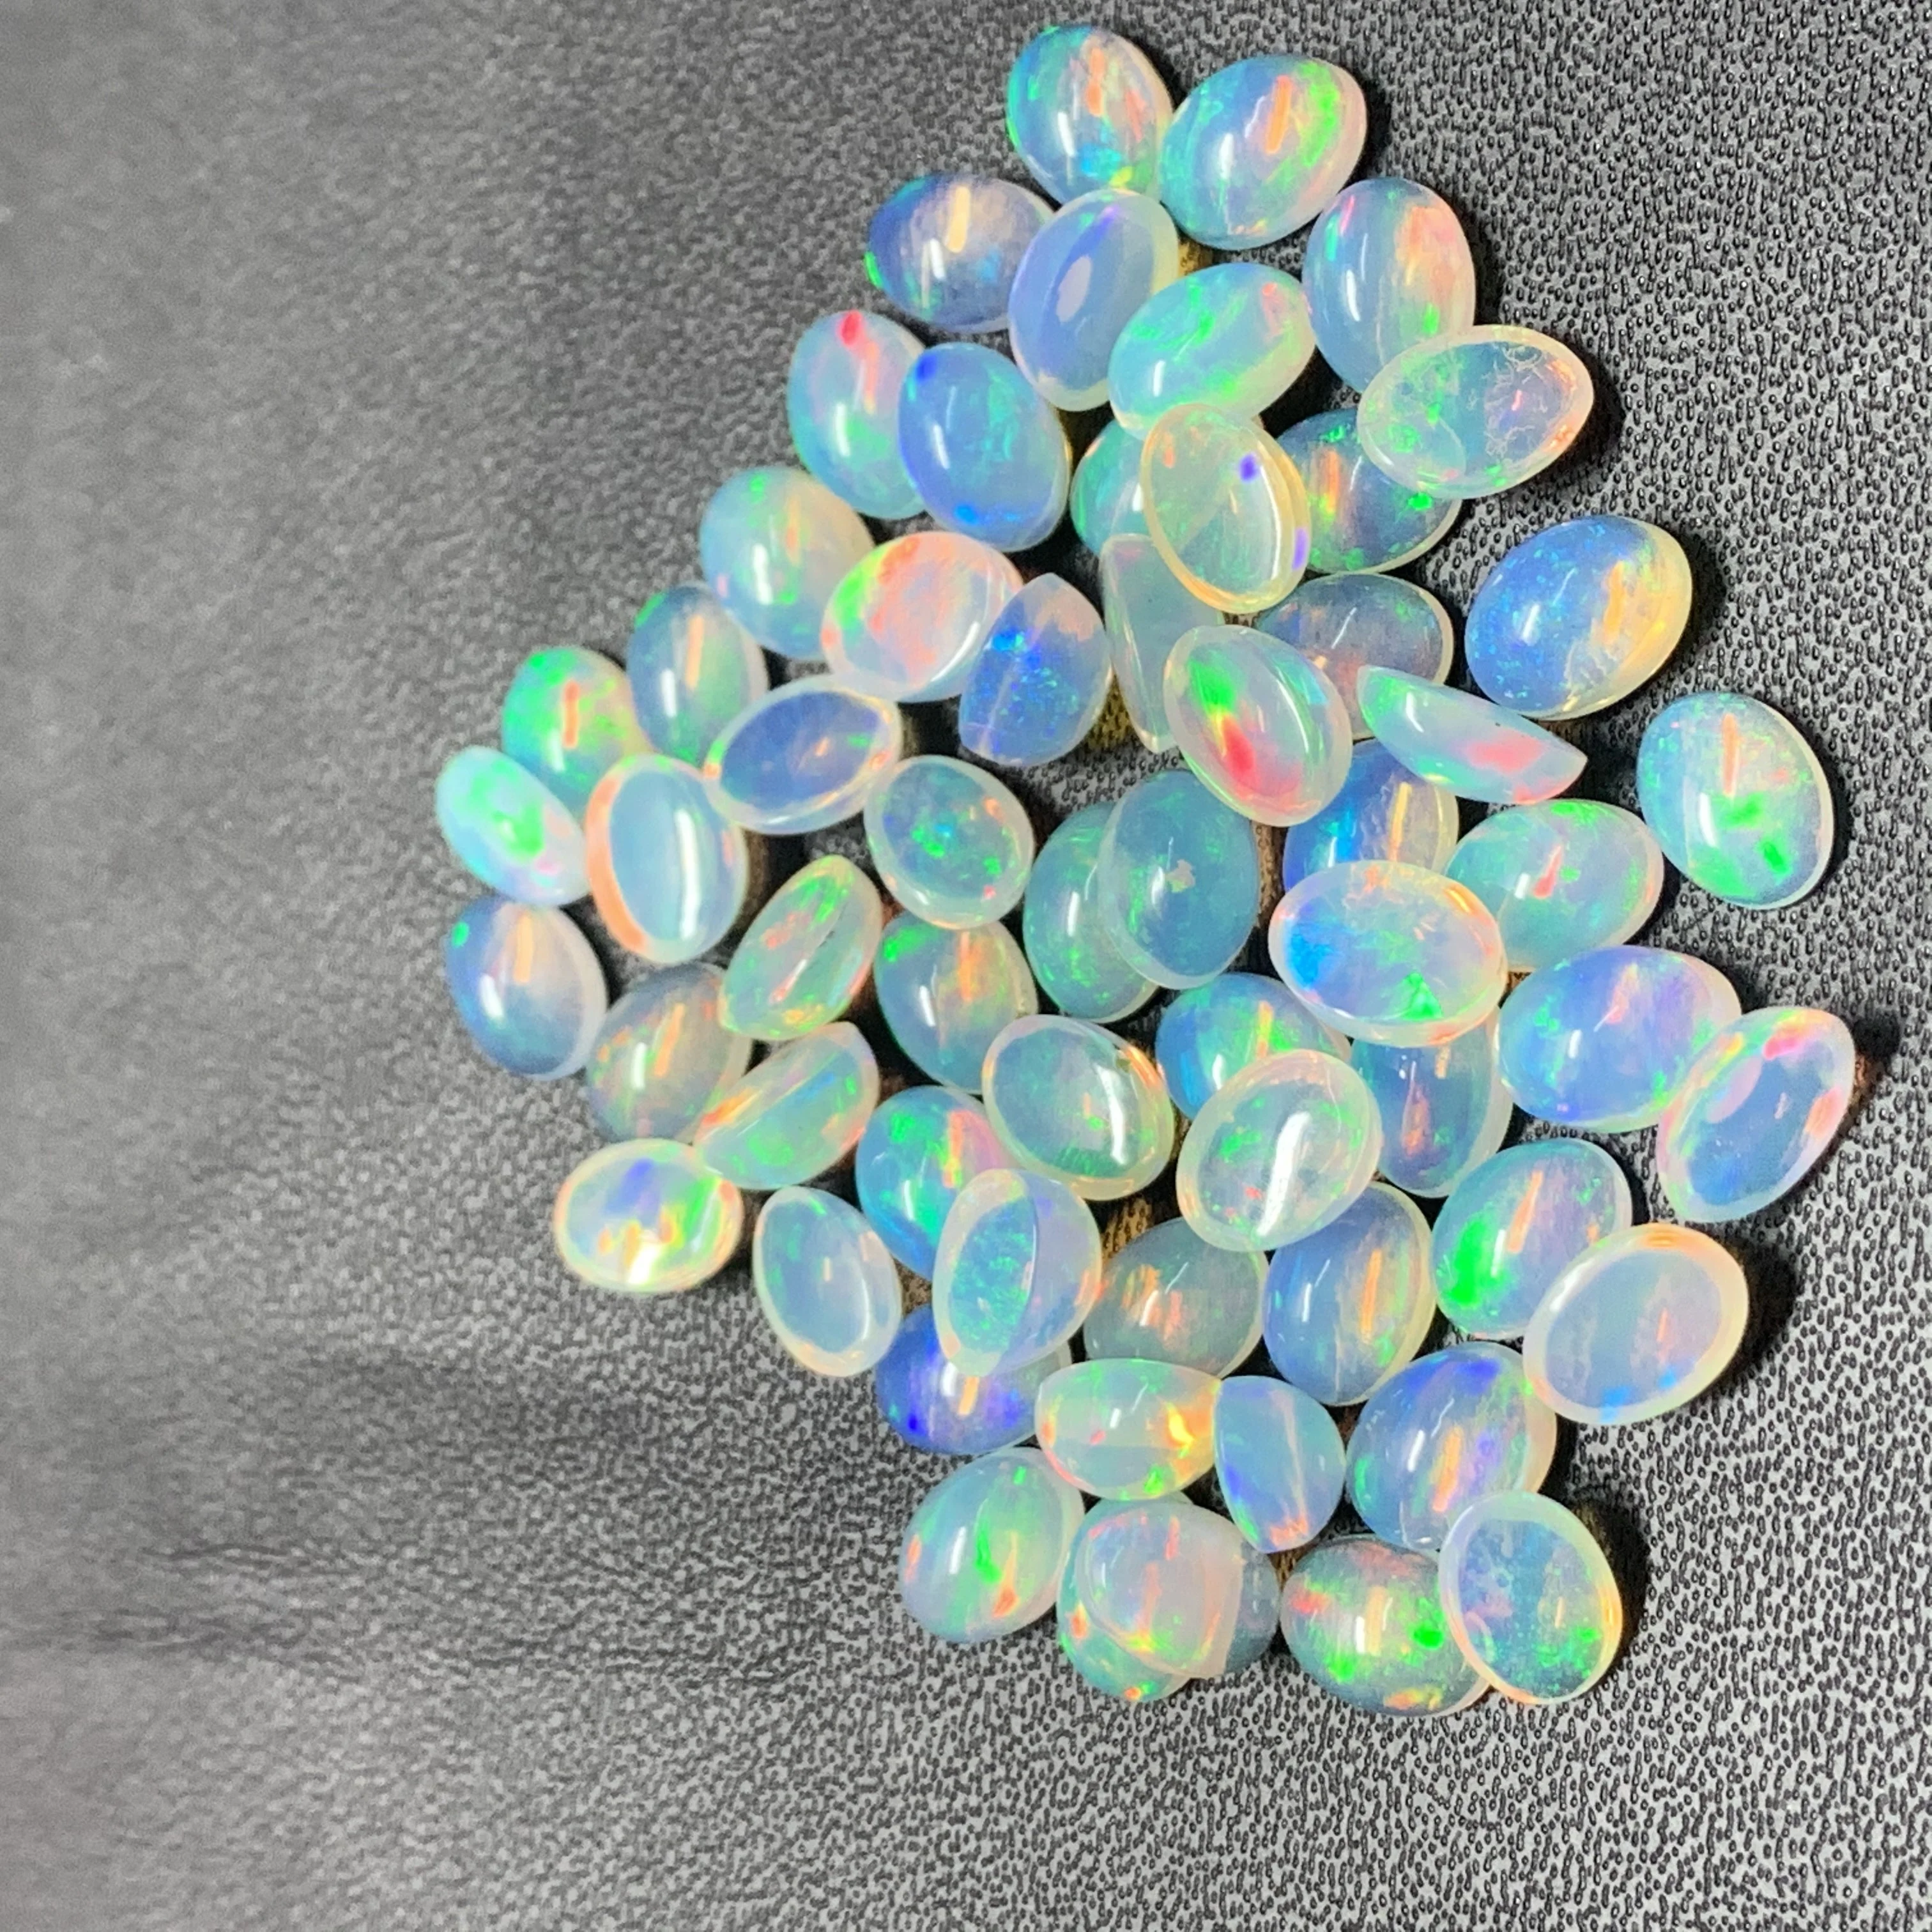 4x3 to 5x4 mm For Making Jewelry Q-4207 8 Ct 1Piece 1 USD AAA Oval  Shape Gemstone Unique Multi Ethiopian Opal Smooth Loose Gemstone